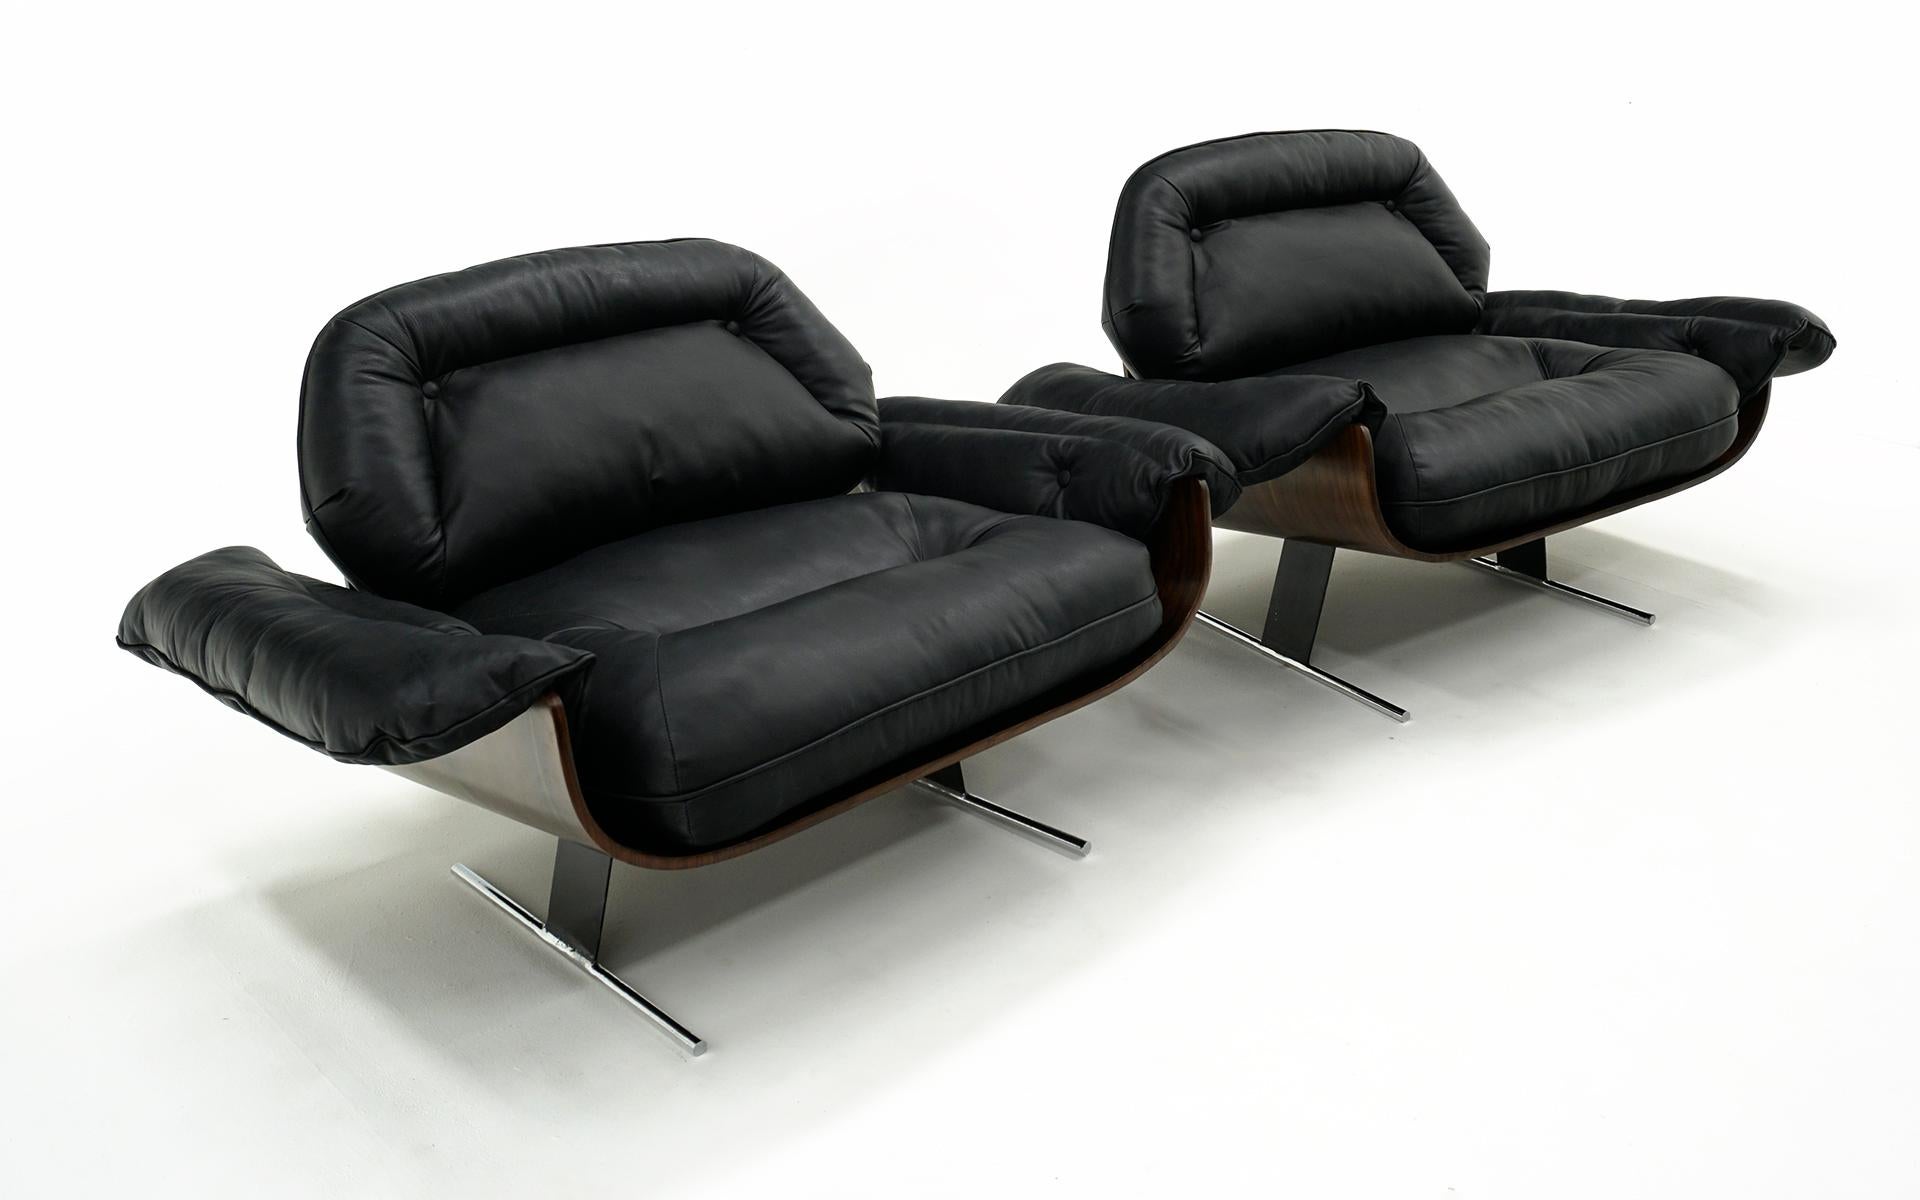 Rare Pair of Jorge Zalszupin Presidential Lounge Chairs.  Brazilian Rosewood frames with the original black leather cushions in very good condition.  No holes, tears or repairs.  Minor wear overall with no distractions.  These are great examples of